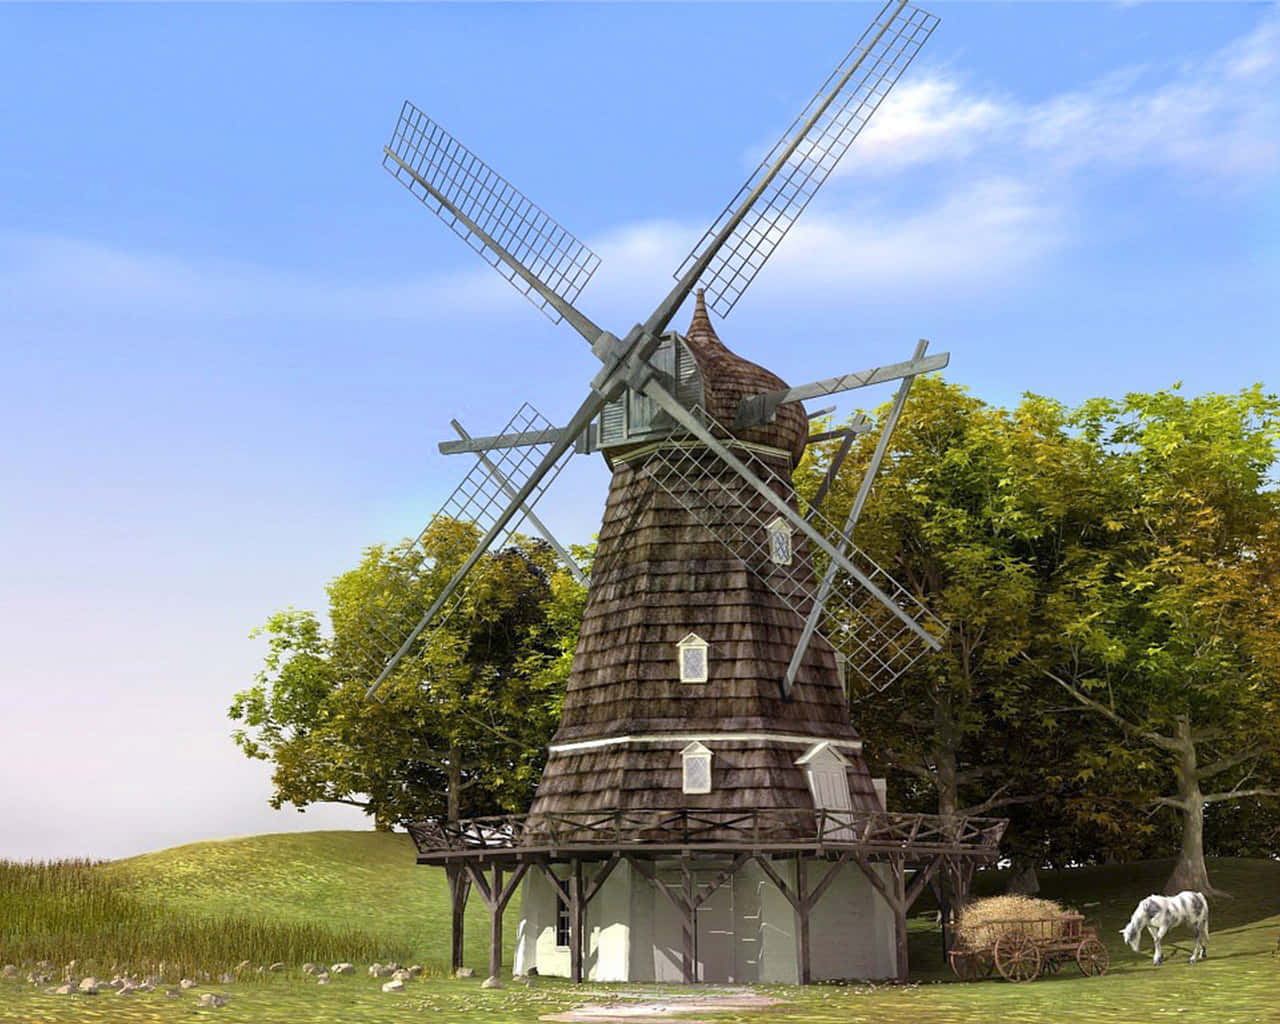 Lush Meadow with a White Windmill